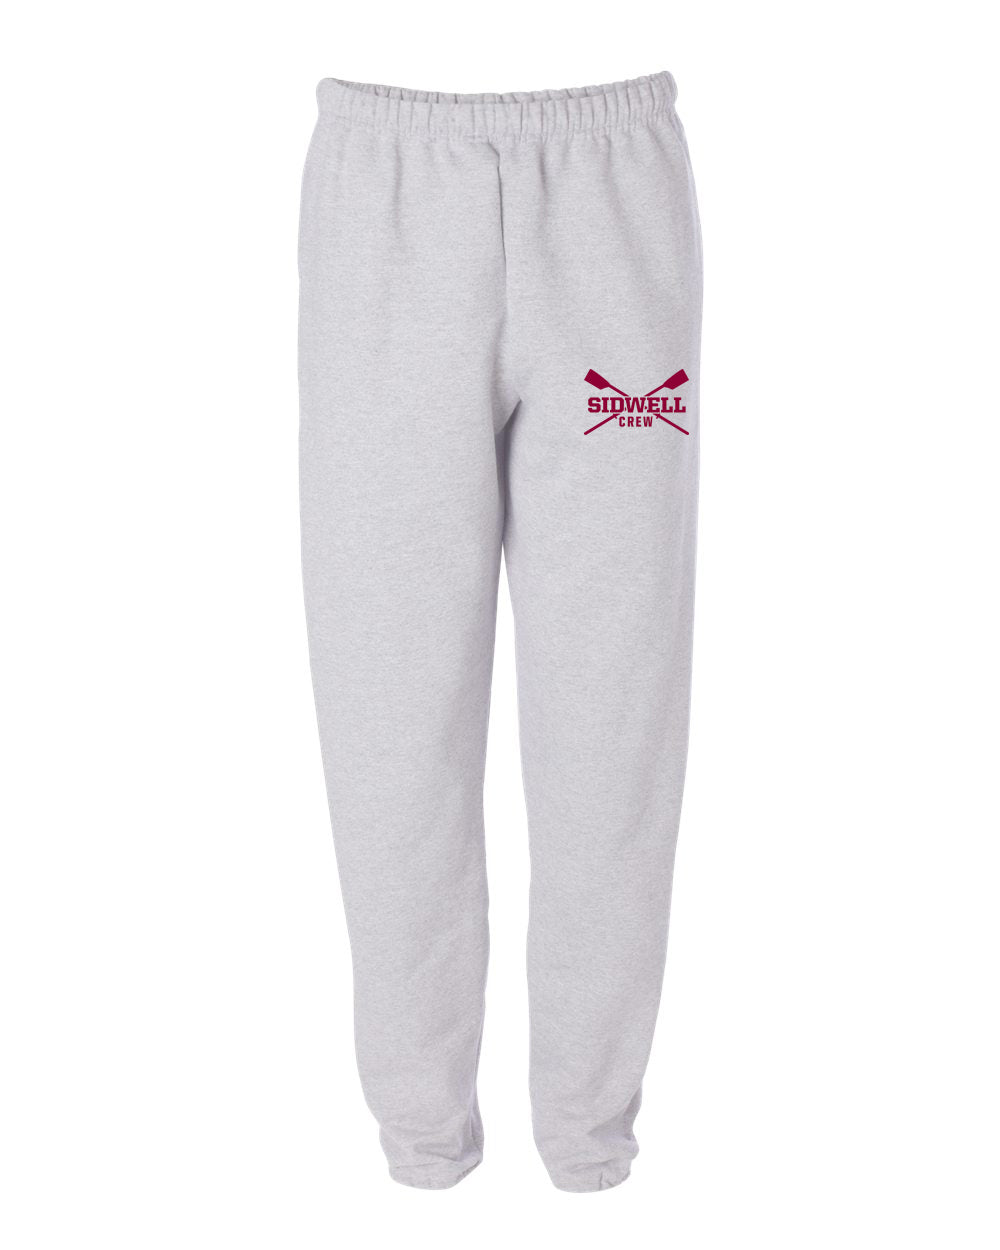 Team Sidwell Friends Rowing Sweatpants